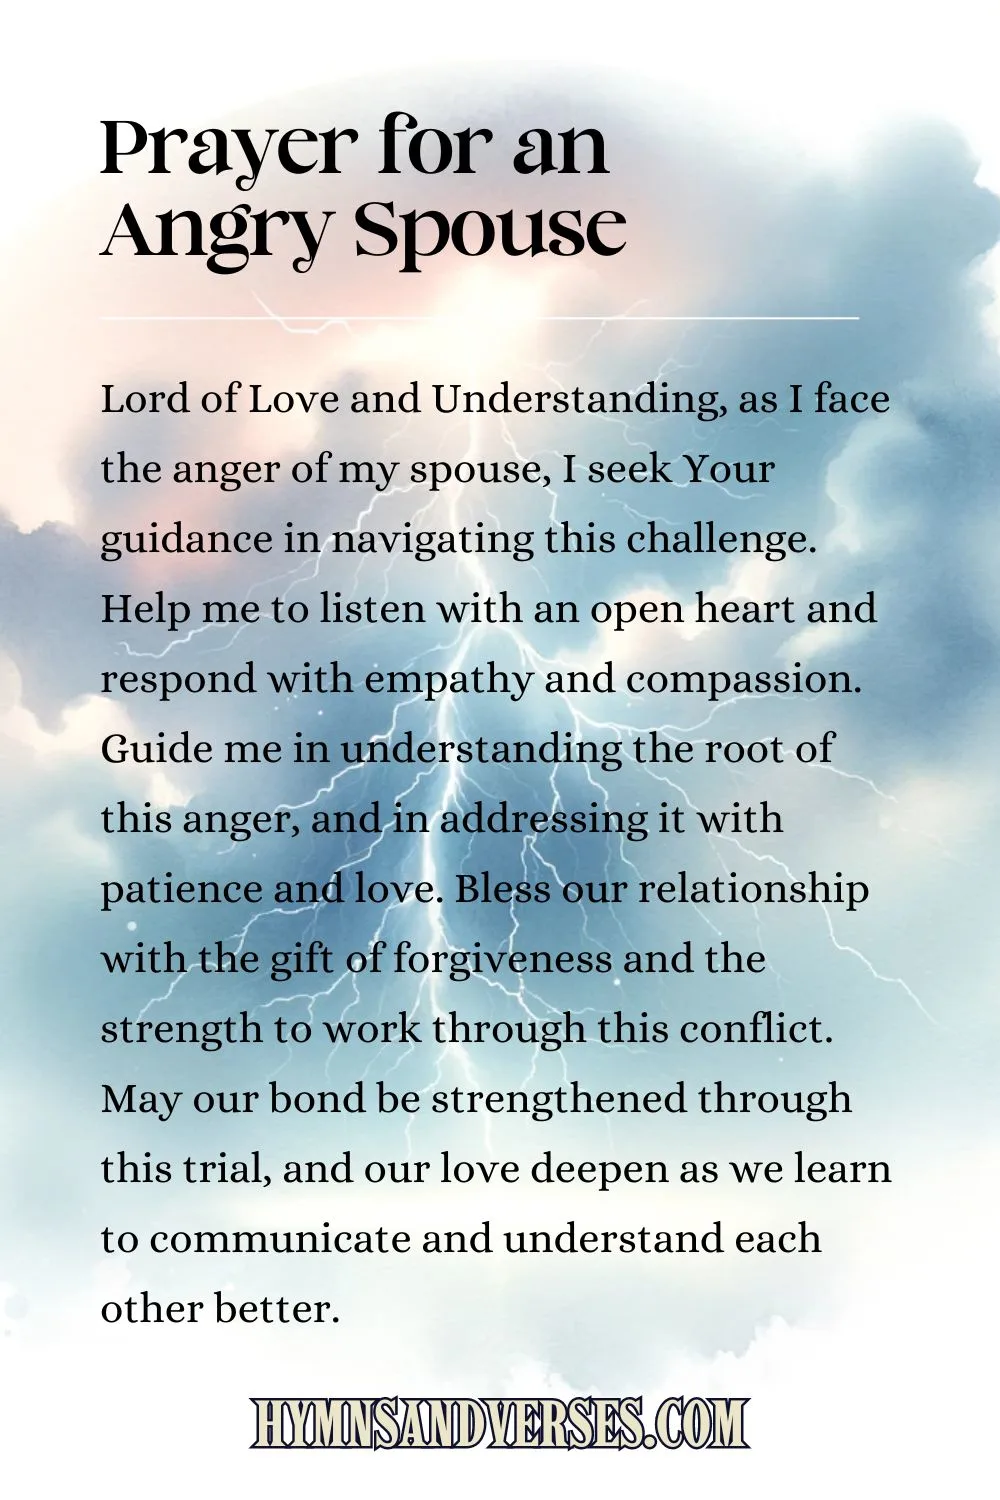 Pin image for prayer, reads: Lord of Love and Understanding, as I face the anger of my spouse, I seek Your guidance in navigating this challenge. Help me to listen with an open heart and respond with empathy and compassion. Guide me in understanding the root of this anger, and in addressing it with patience and love. Bless our relationship with the gift of forgiveness and the strength to work through this conflict. May our bond be strengthened through this trial, and our love deepen as we learn to communicate and understand each other better.